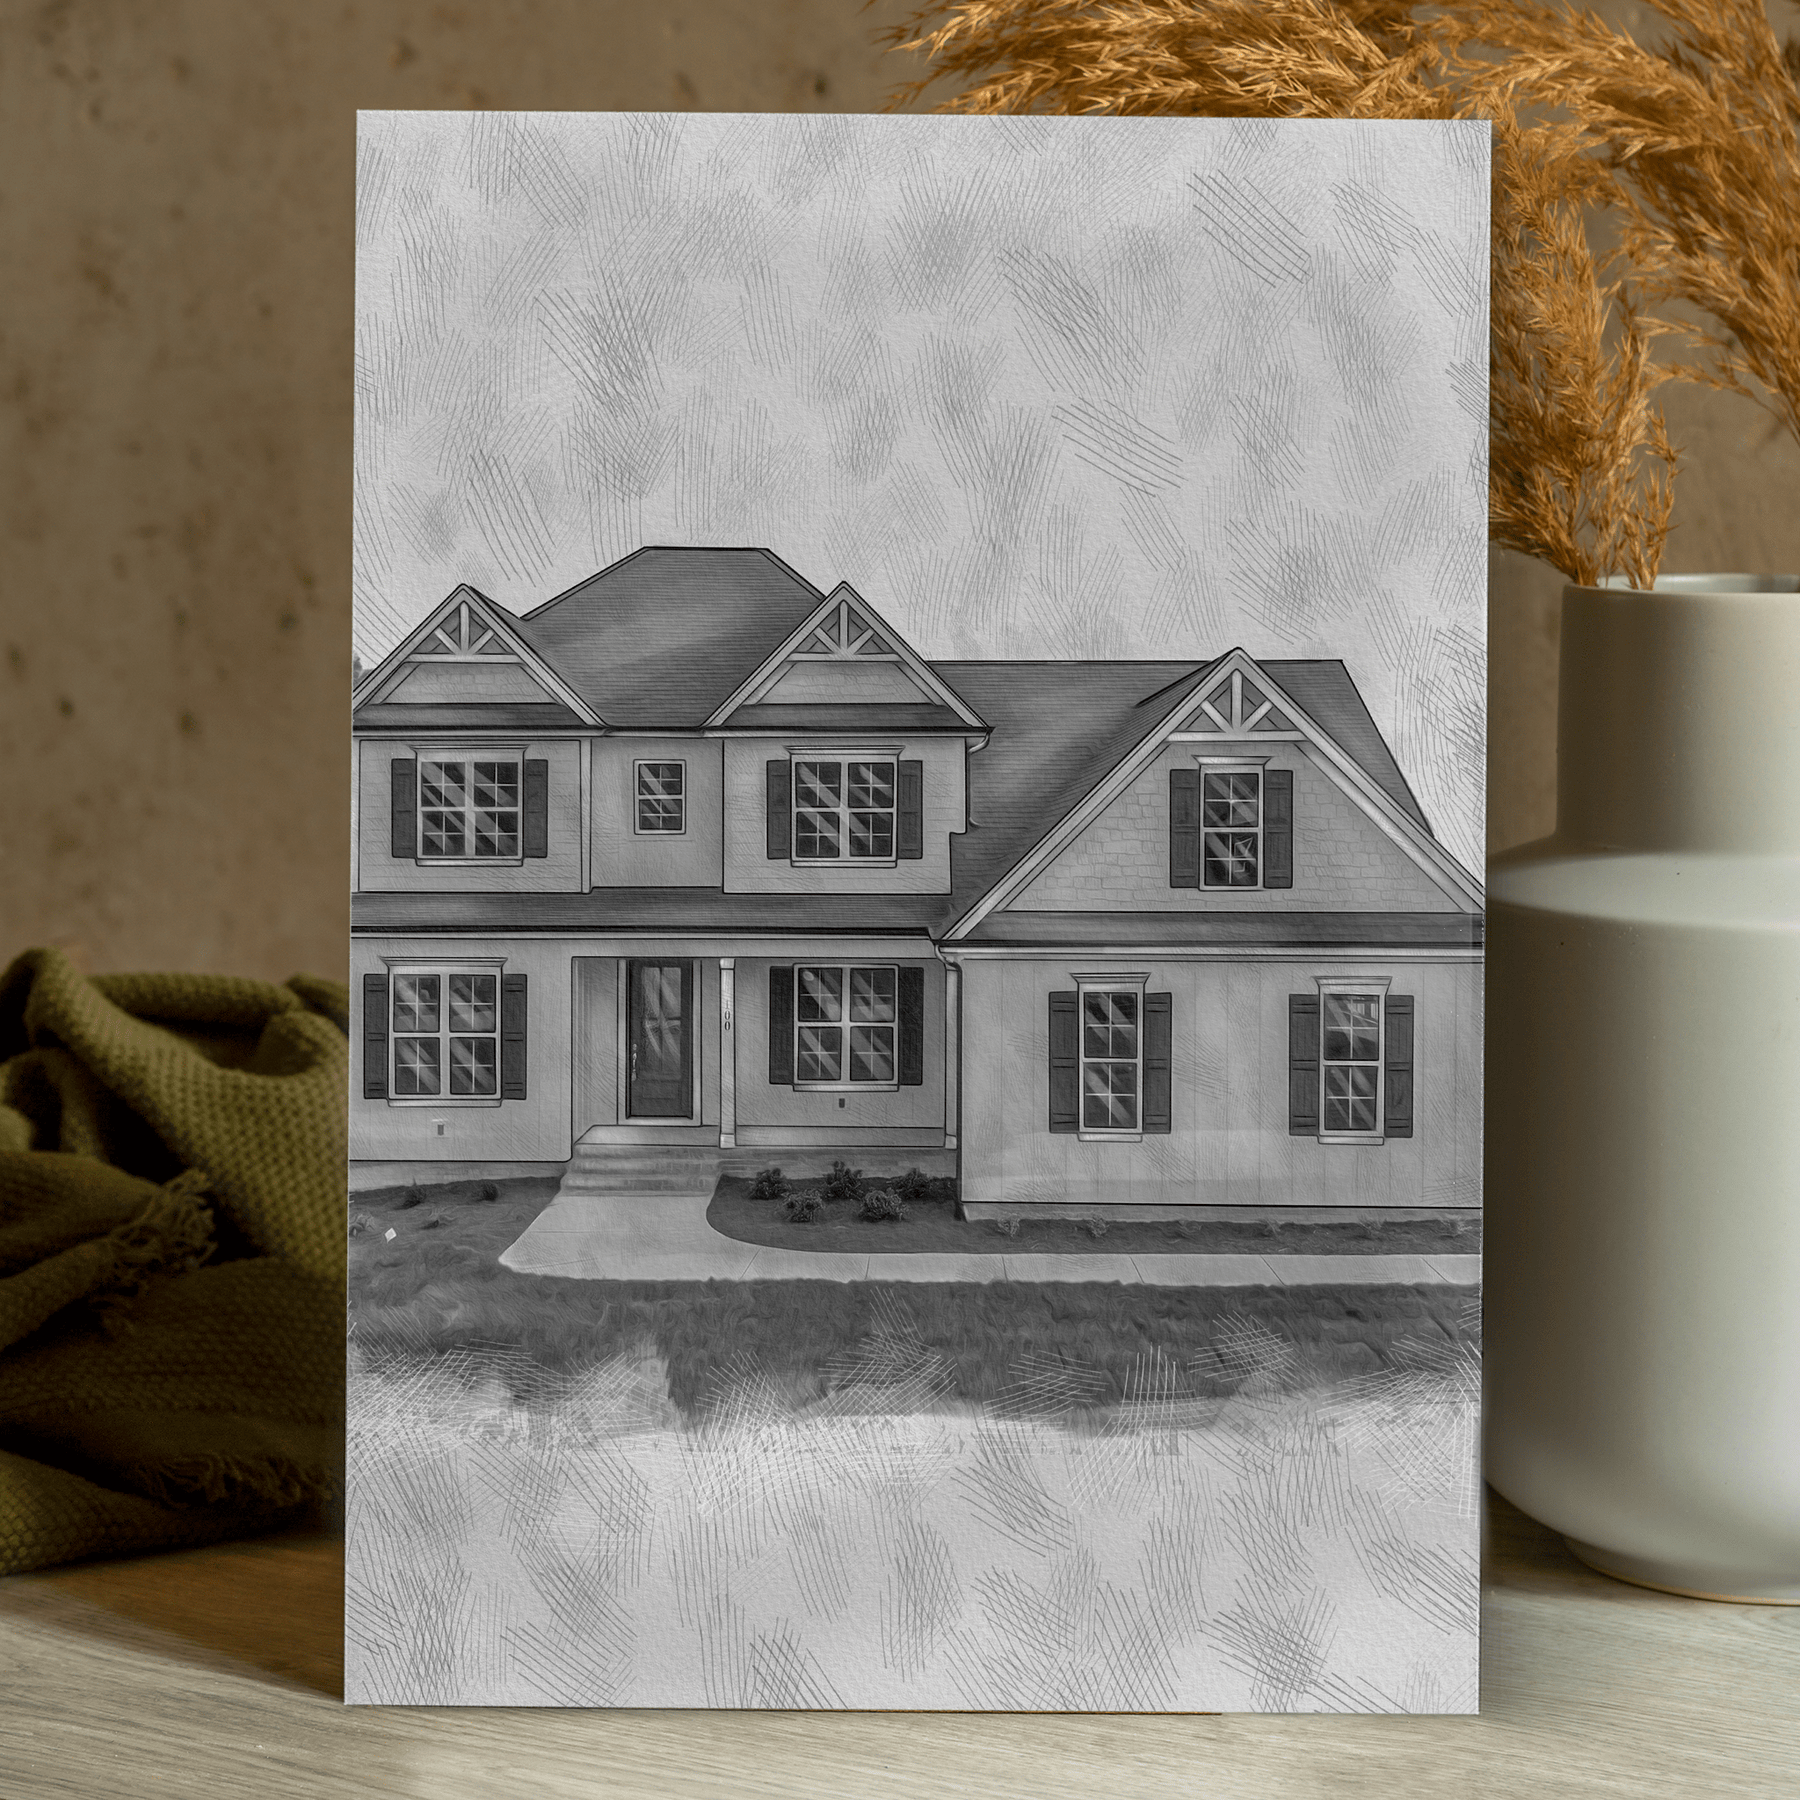 70,000+ Free House Sketch & House Images - Pixabay